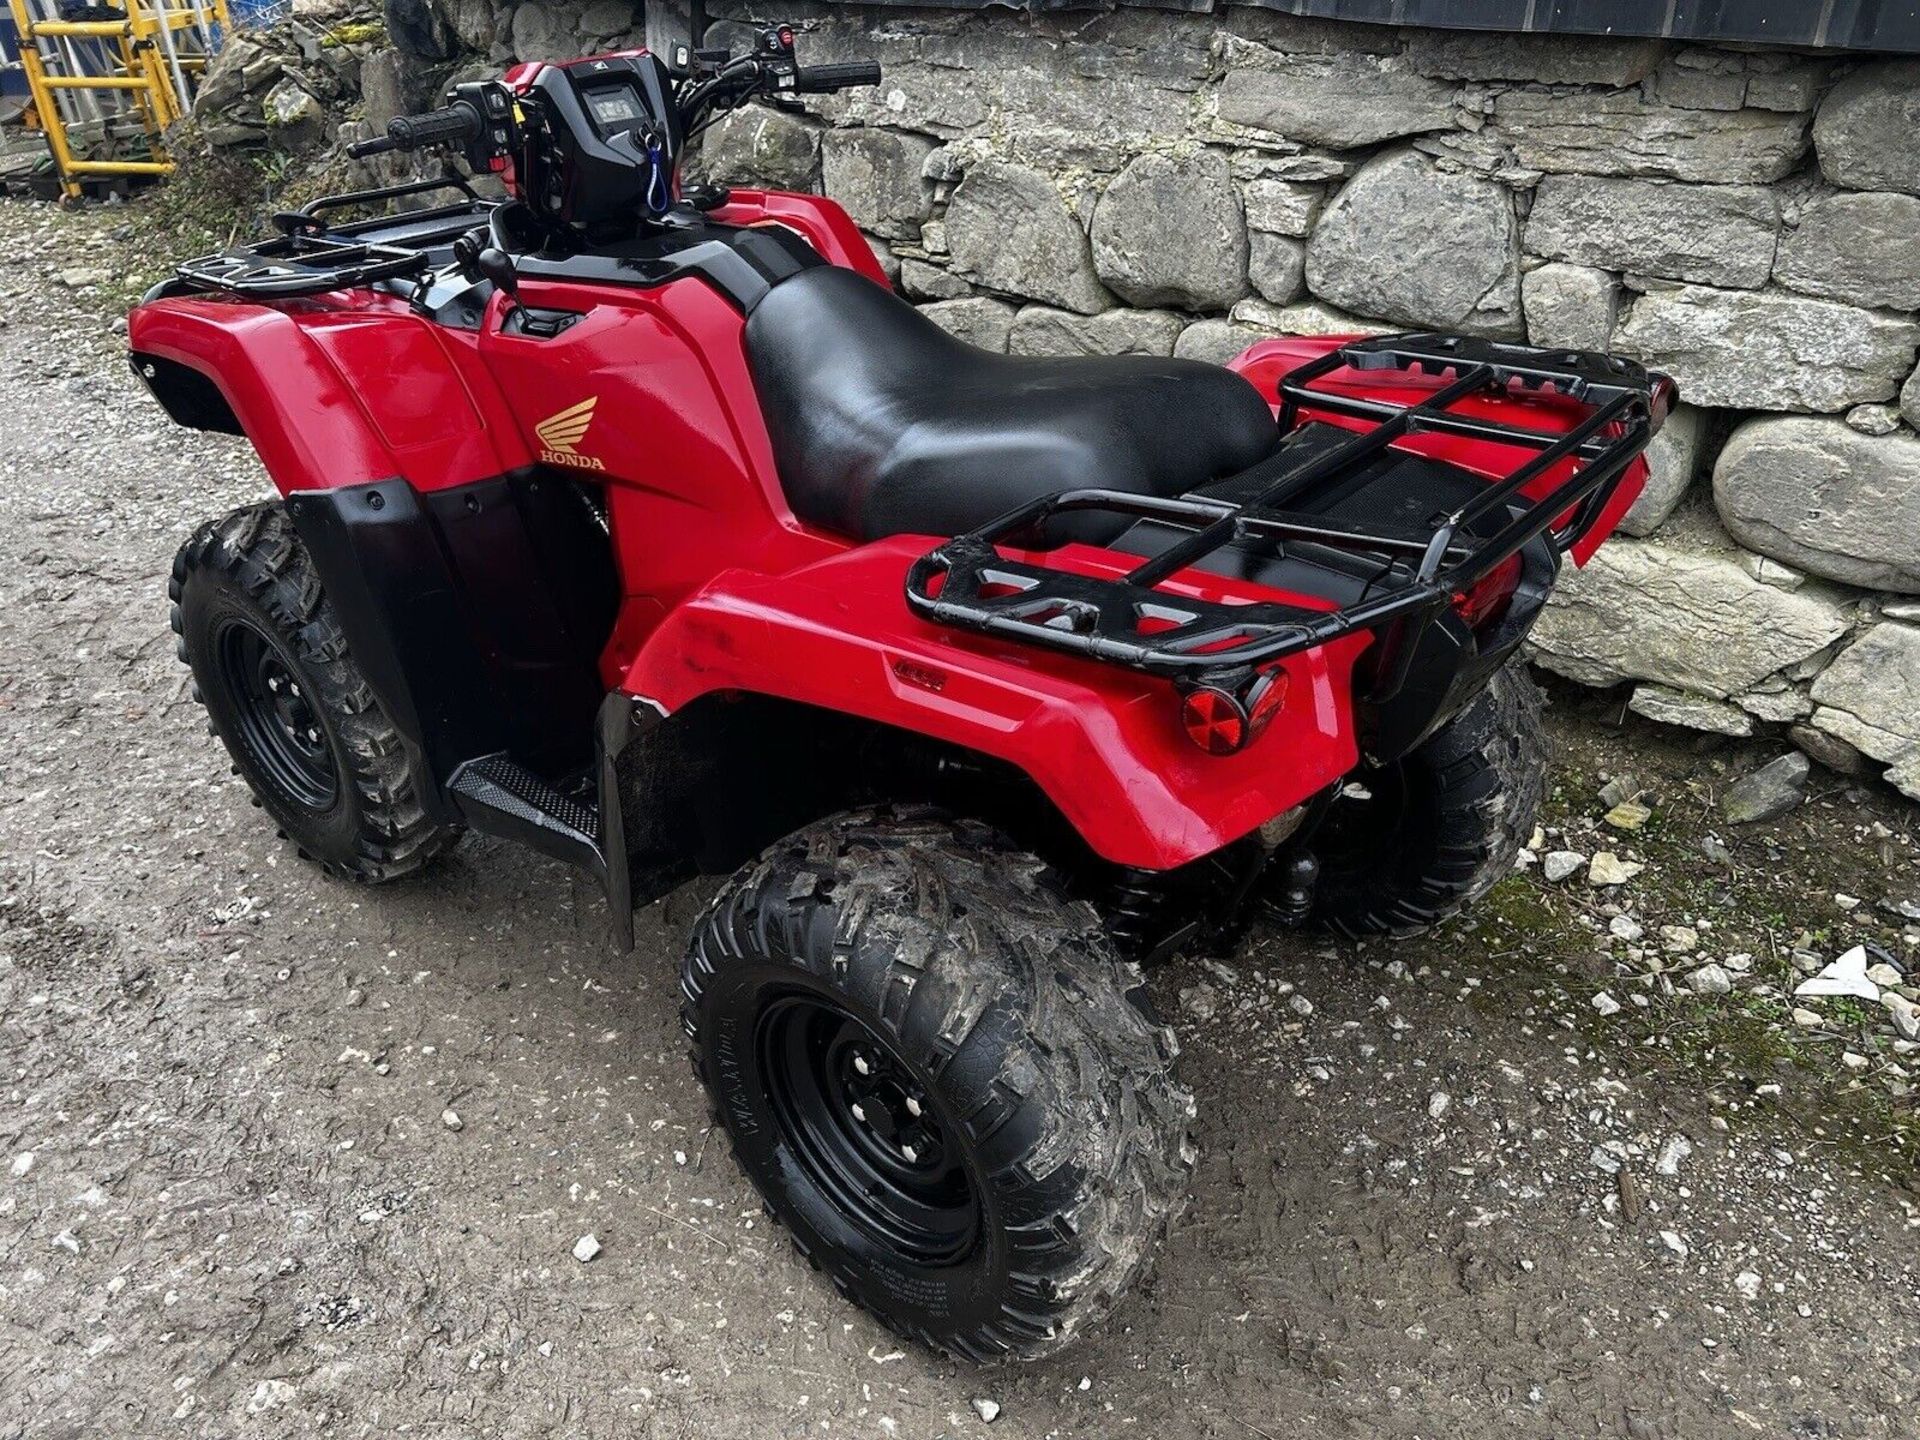 EPS PIONEER: HONDA TRX 500 FE QUAD WITH ELECTRIC POWER STEERING - Image 7 of 8